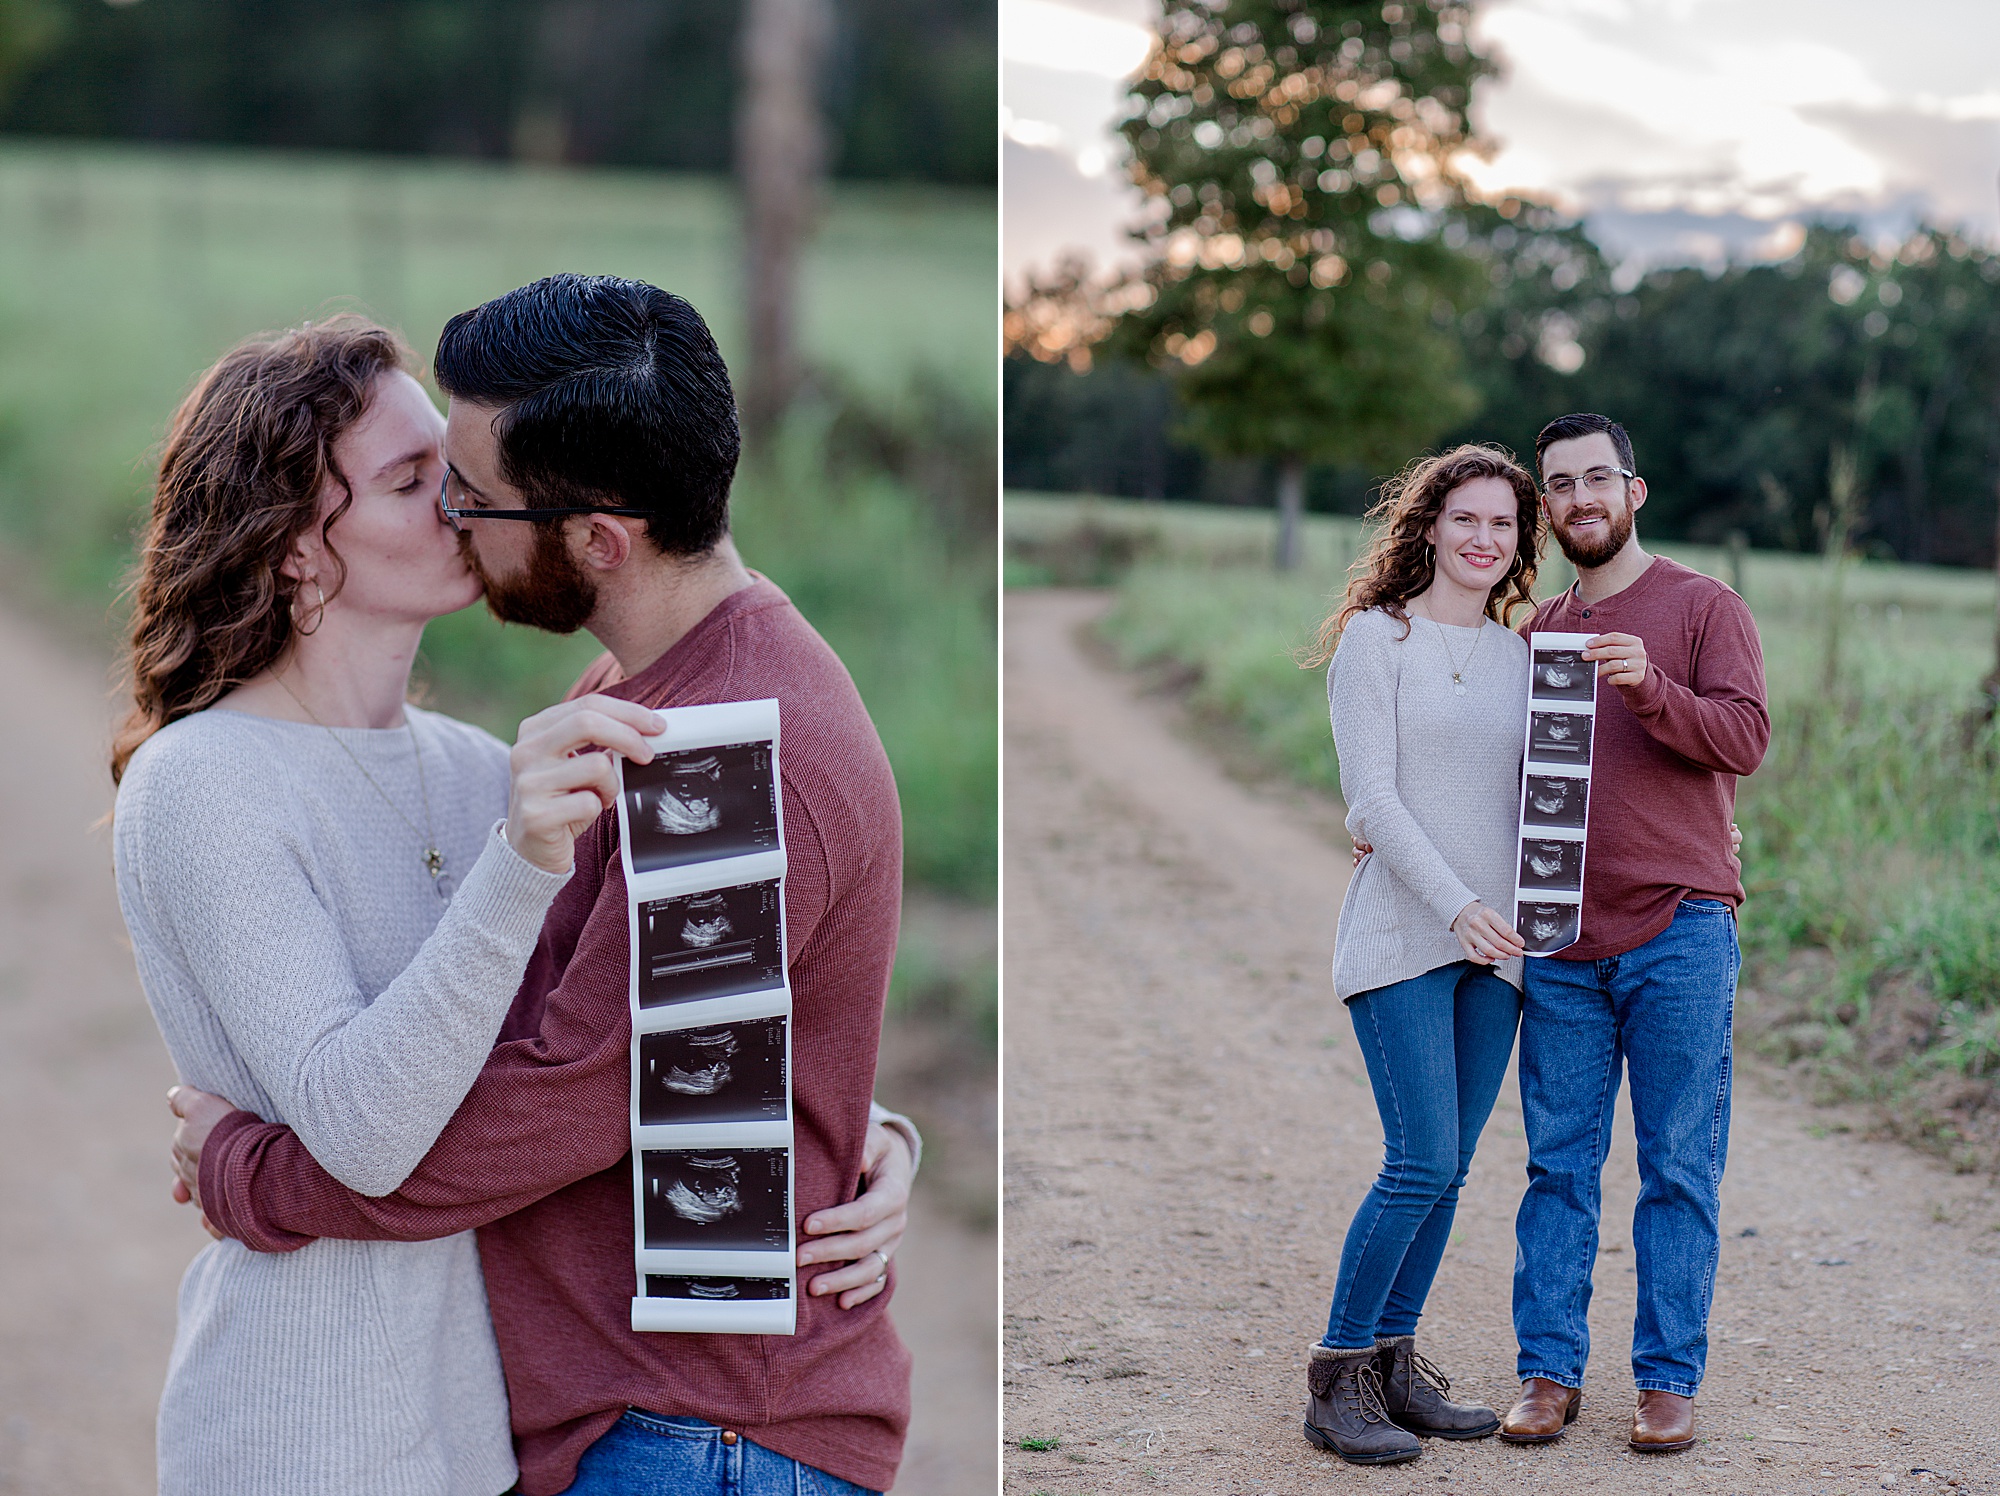 married couple kisses holding sonogram during Pregnancy Announcement in Hickman County, TN